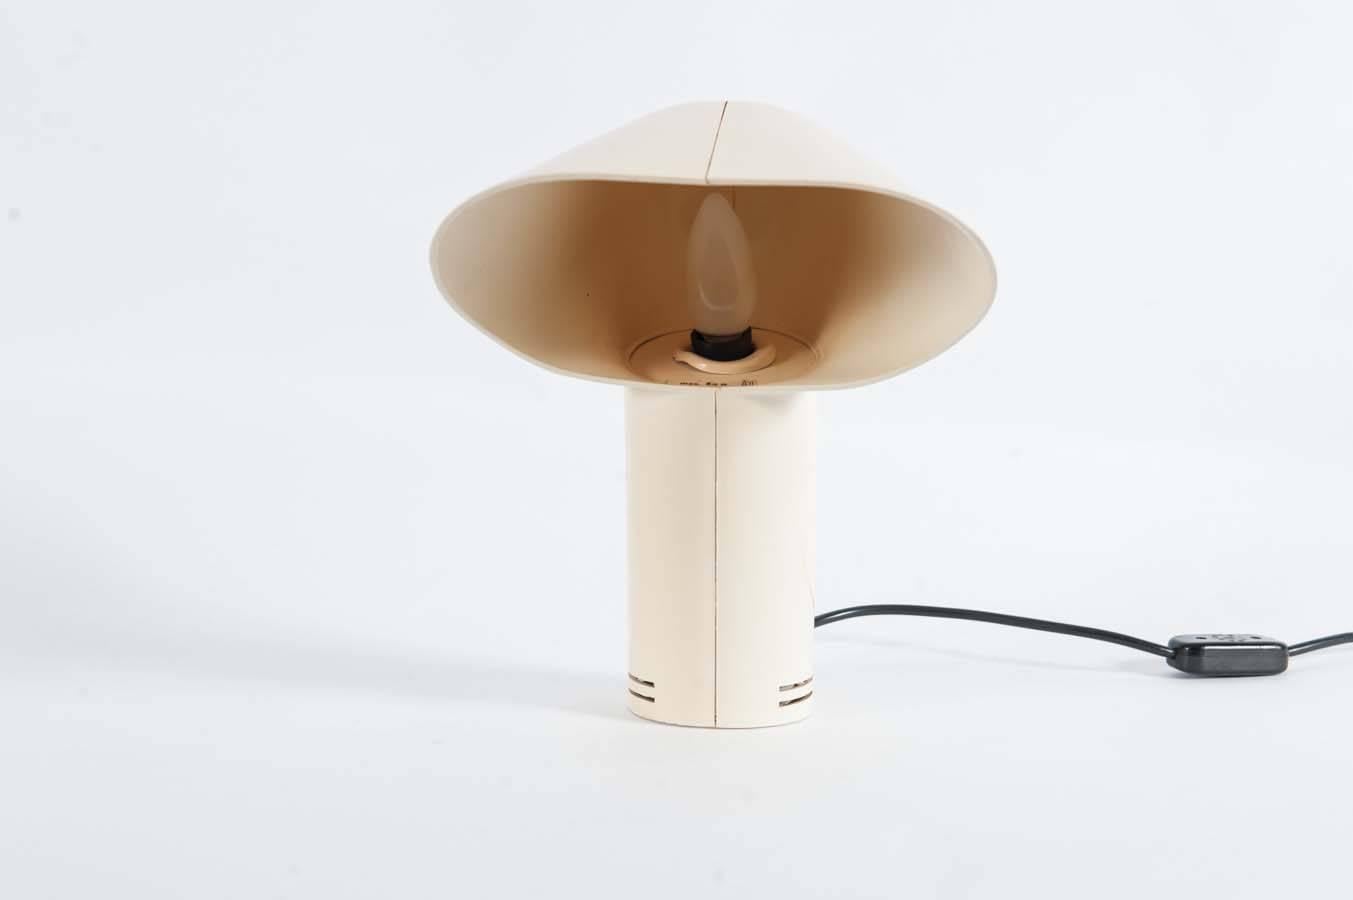 Sorella lamp, a design by Harvey Guzzini for iGuzzini from 1972.
This gorgeous space-age lamp starred in the tv series Space and in the James Bond movie Moonraker.
In a good condition, minor discoloring of the plastic.